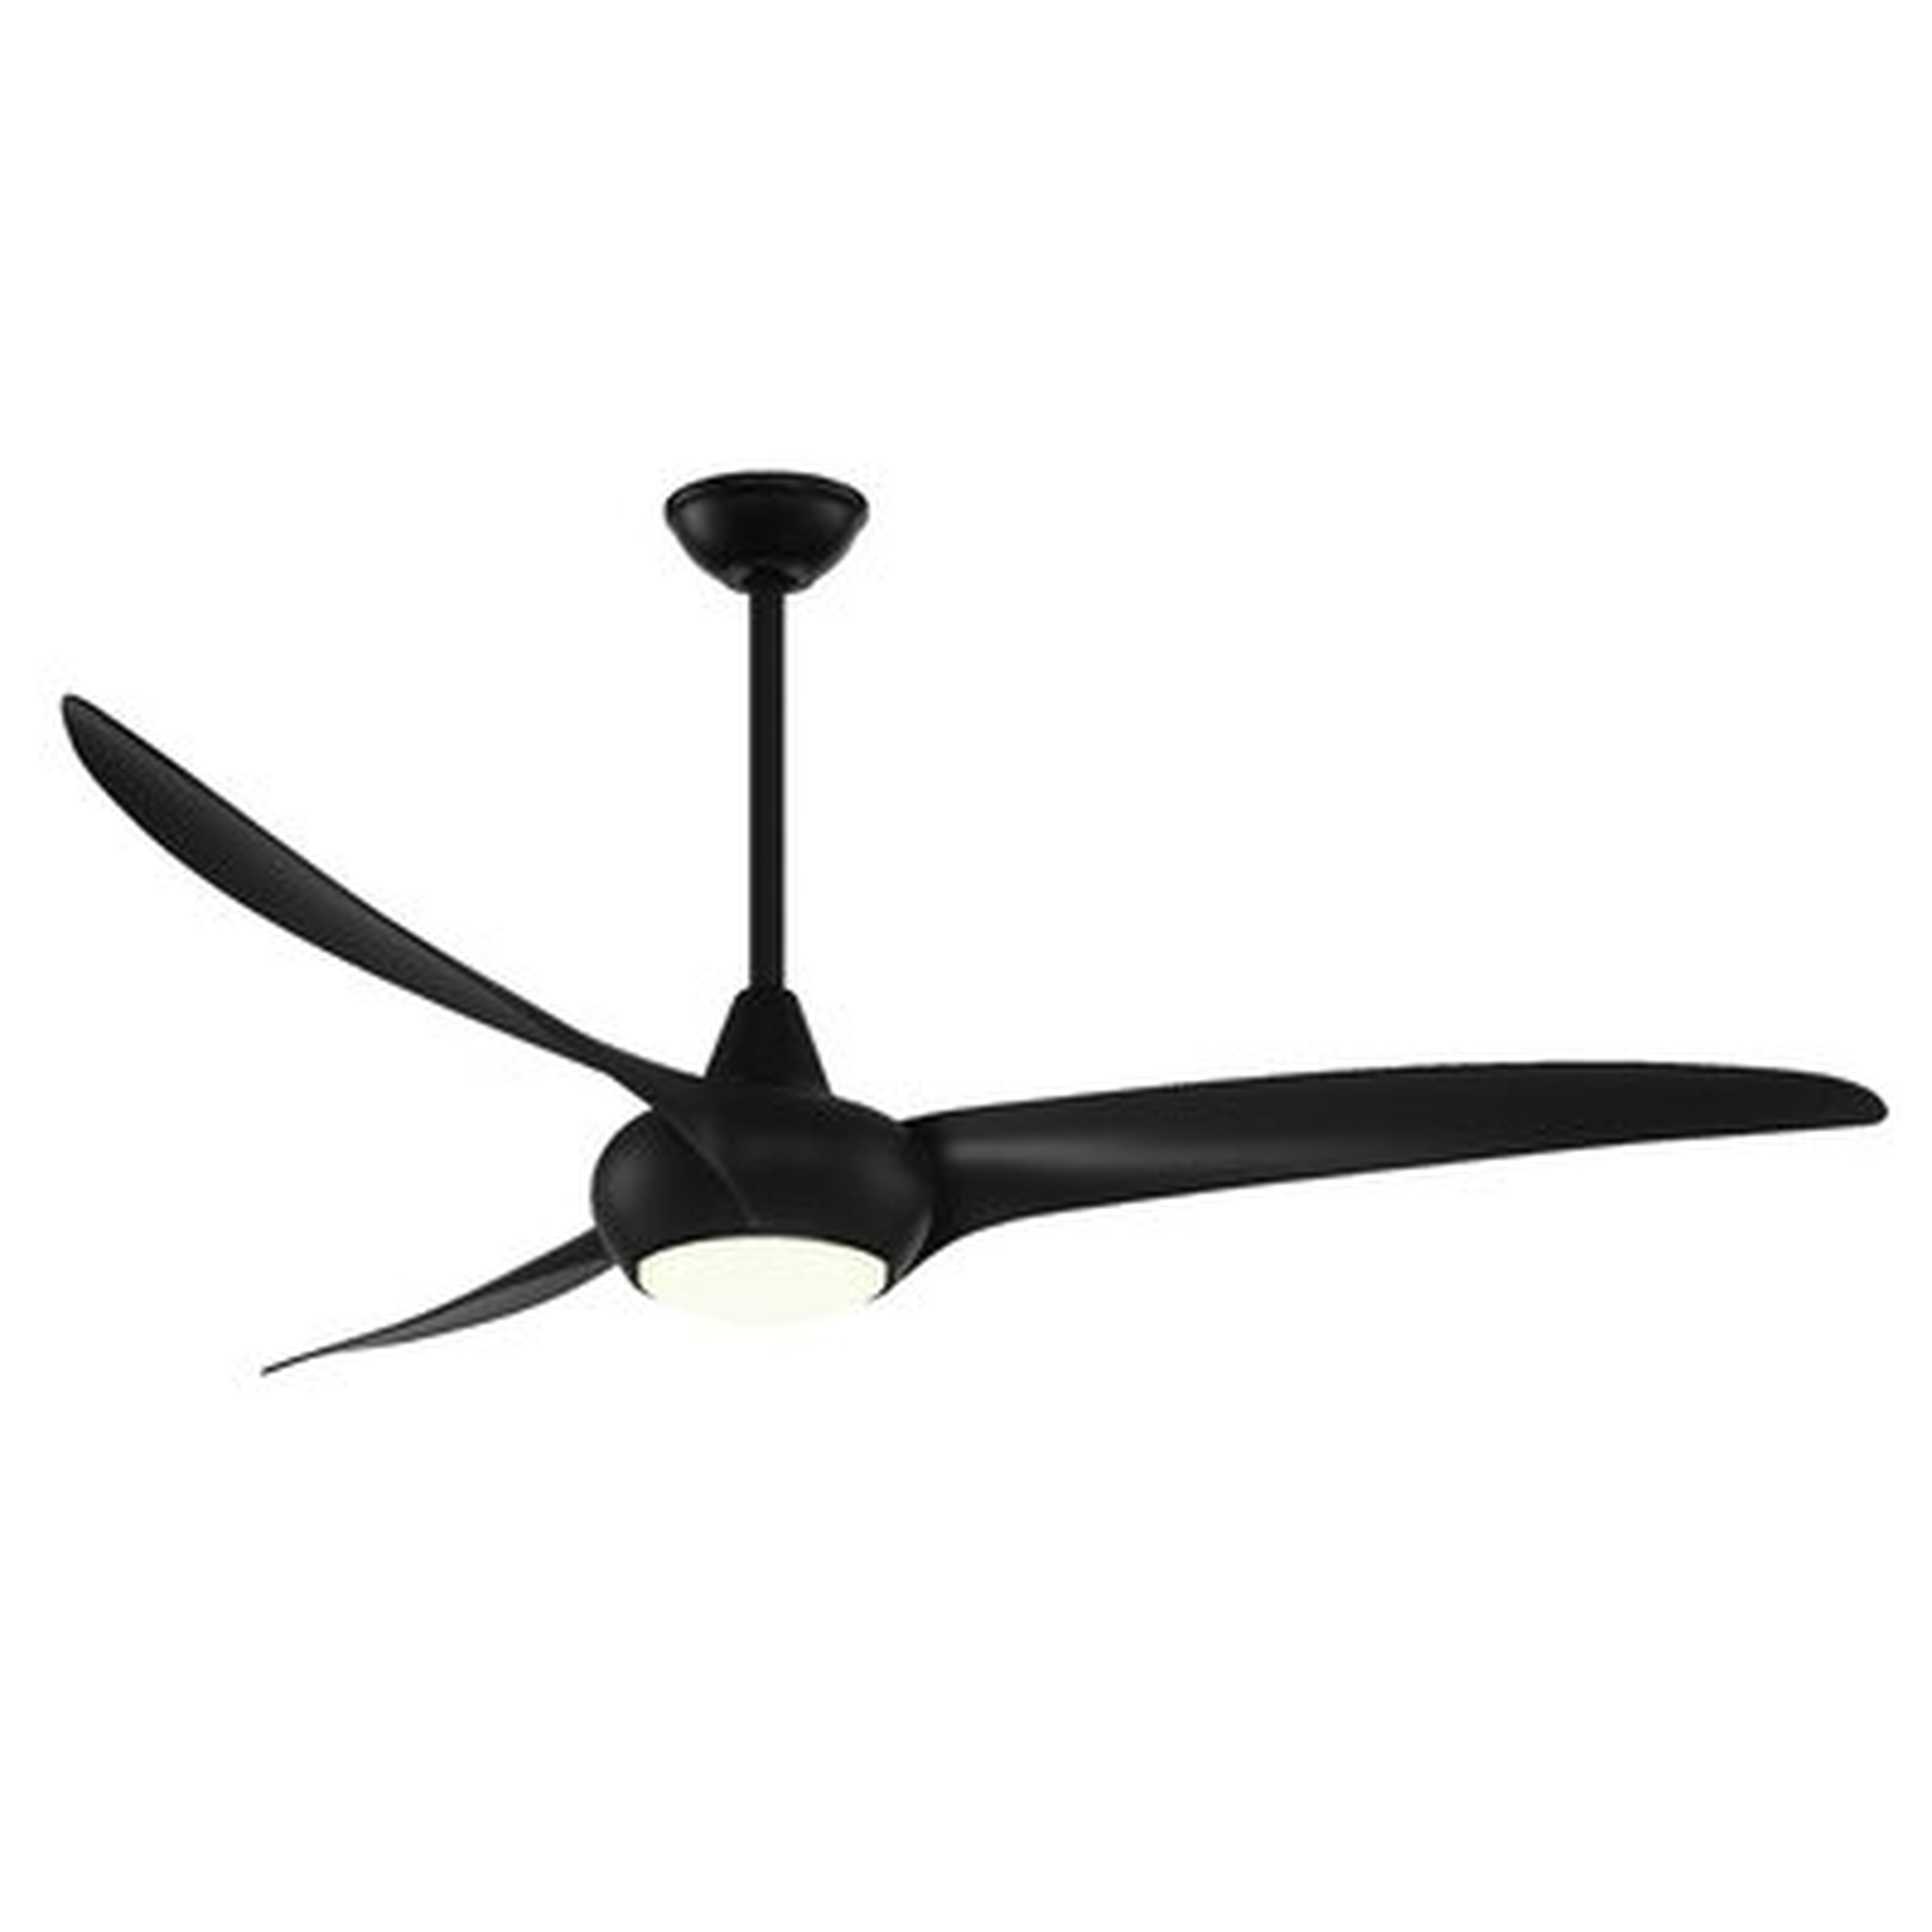 65" 3 - Blade LED Propeller Ceiling Fan with Remote Control and Light Kit Included - Wayfair